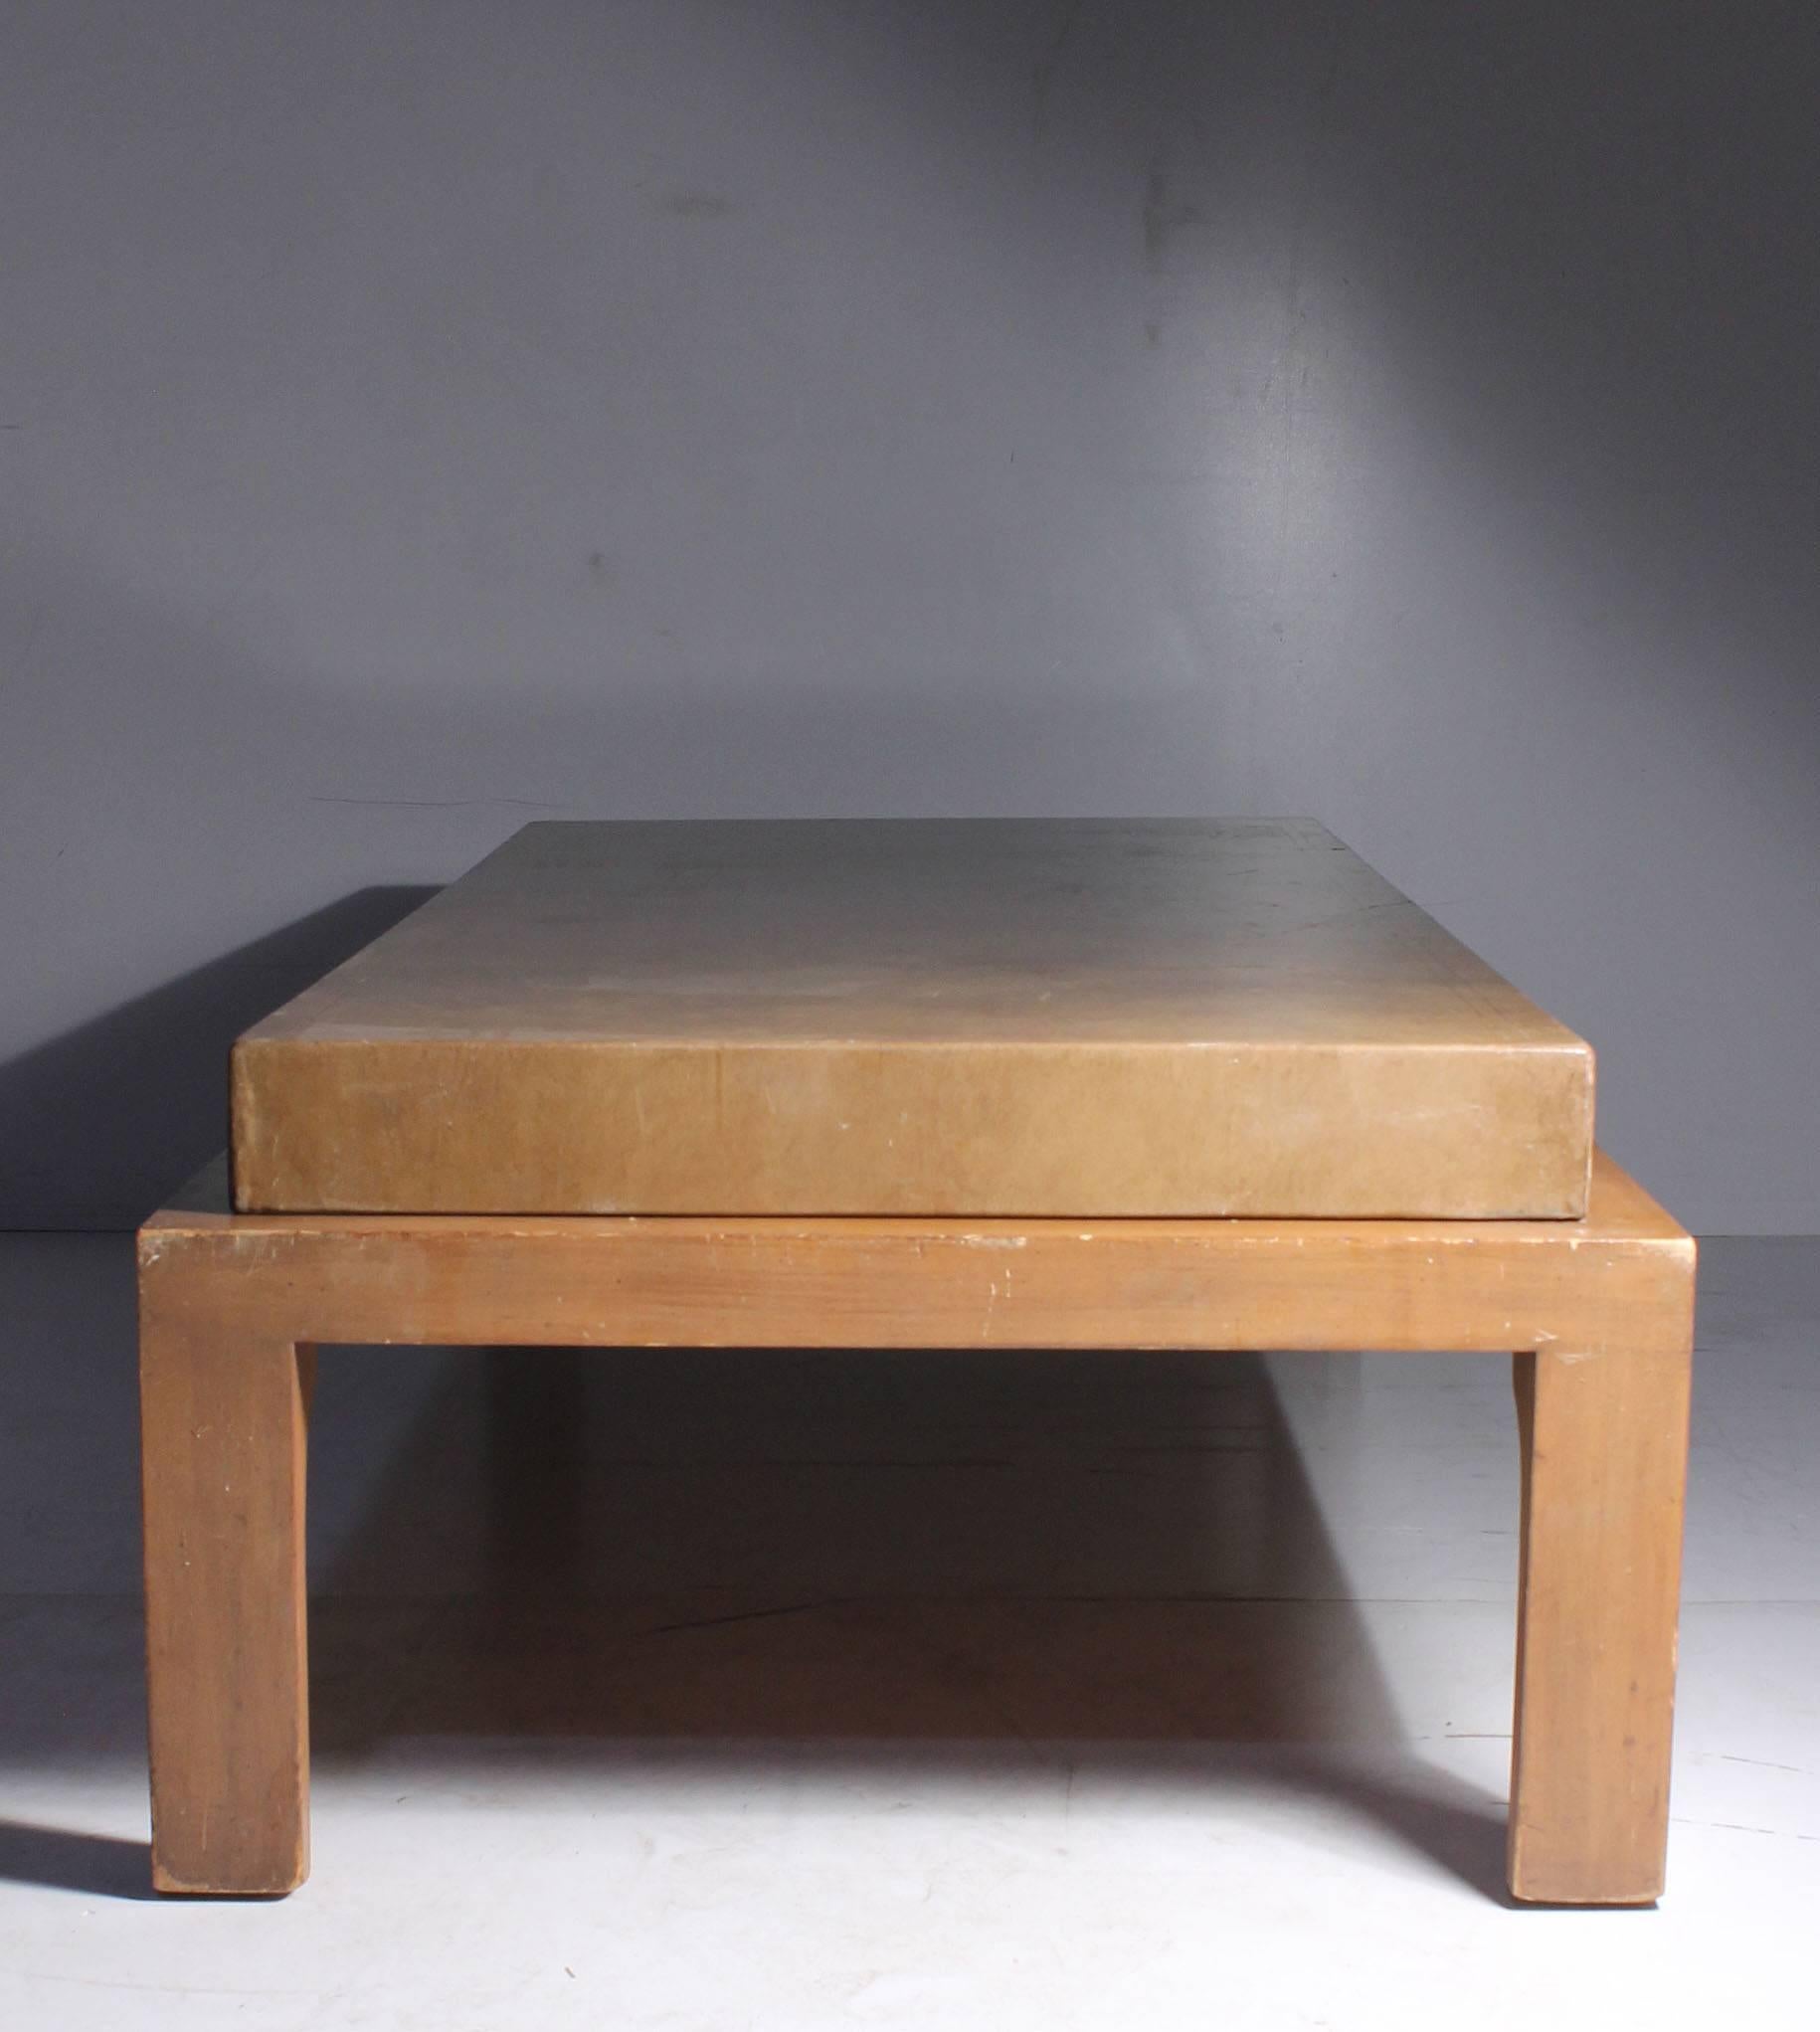 Vintage Mid-Century leather wrapped designer coffee table attributed to Tommi Parzinger. Gold tooling leather wrapped box sits elegantly on a stretcher base. No labels on the piece.  The leg shape is the same form Tommi Parzinger has executed other